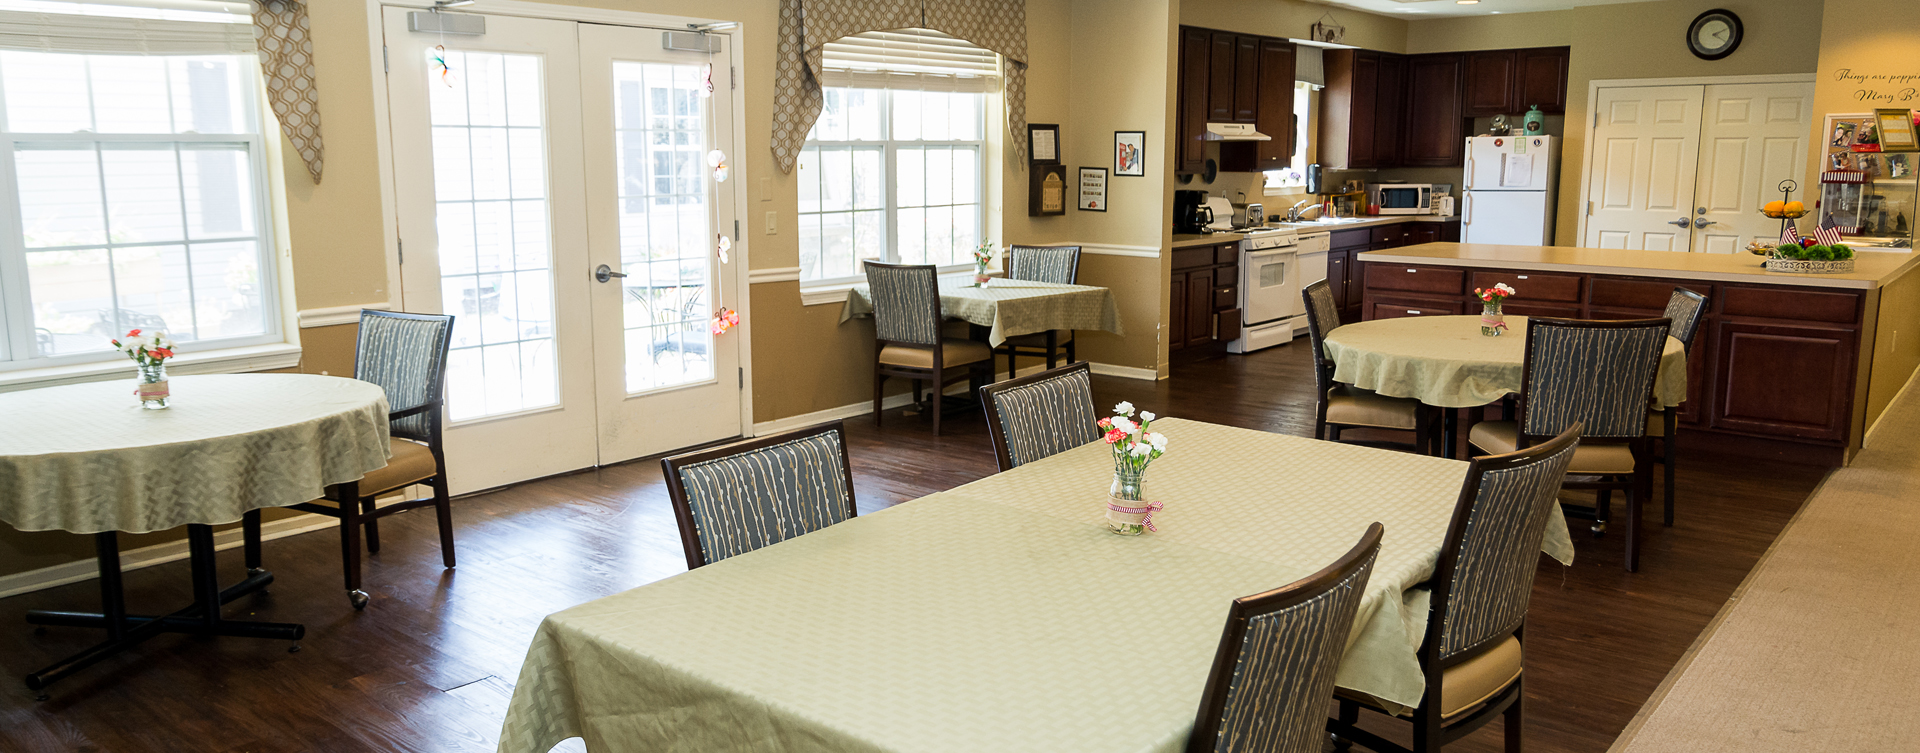 Mary B’s country kitchen evokes a sense of home and reconnects residents to past life skills at Bickford of Oswego